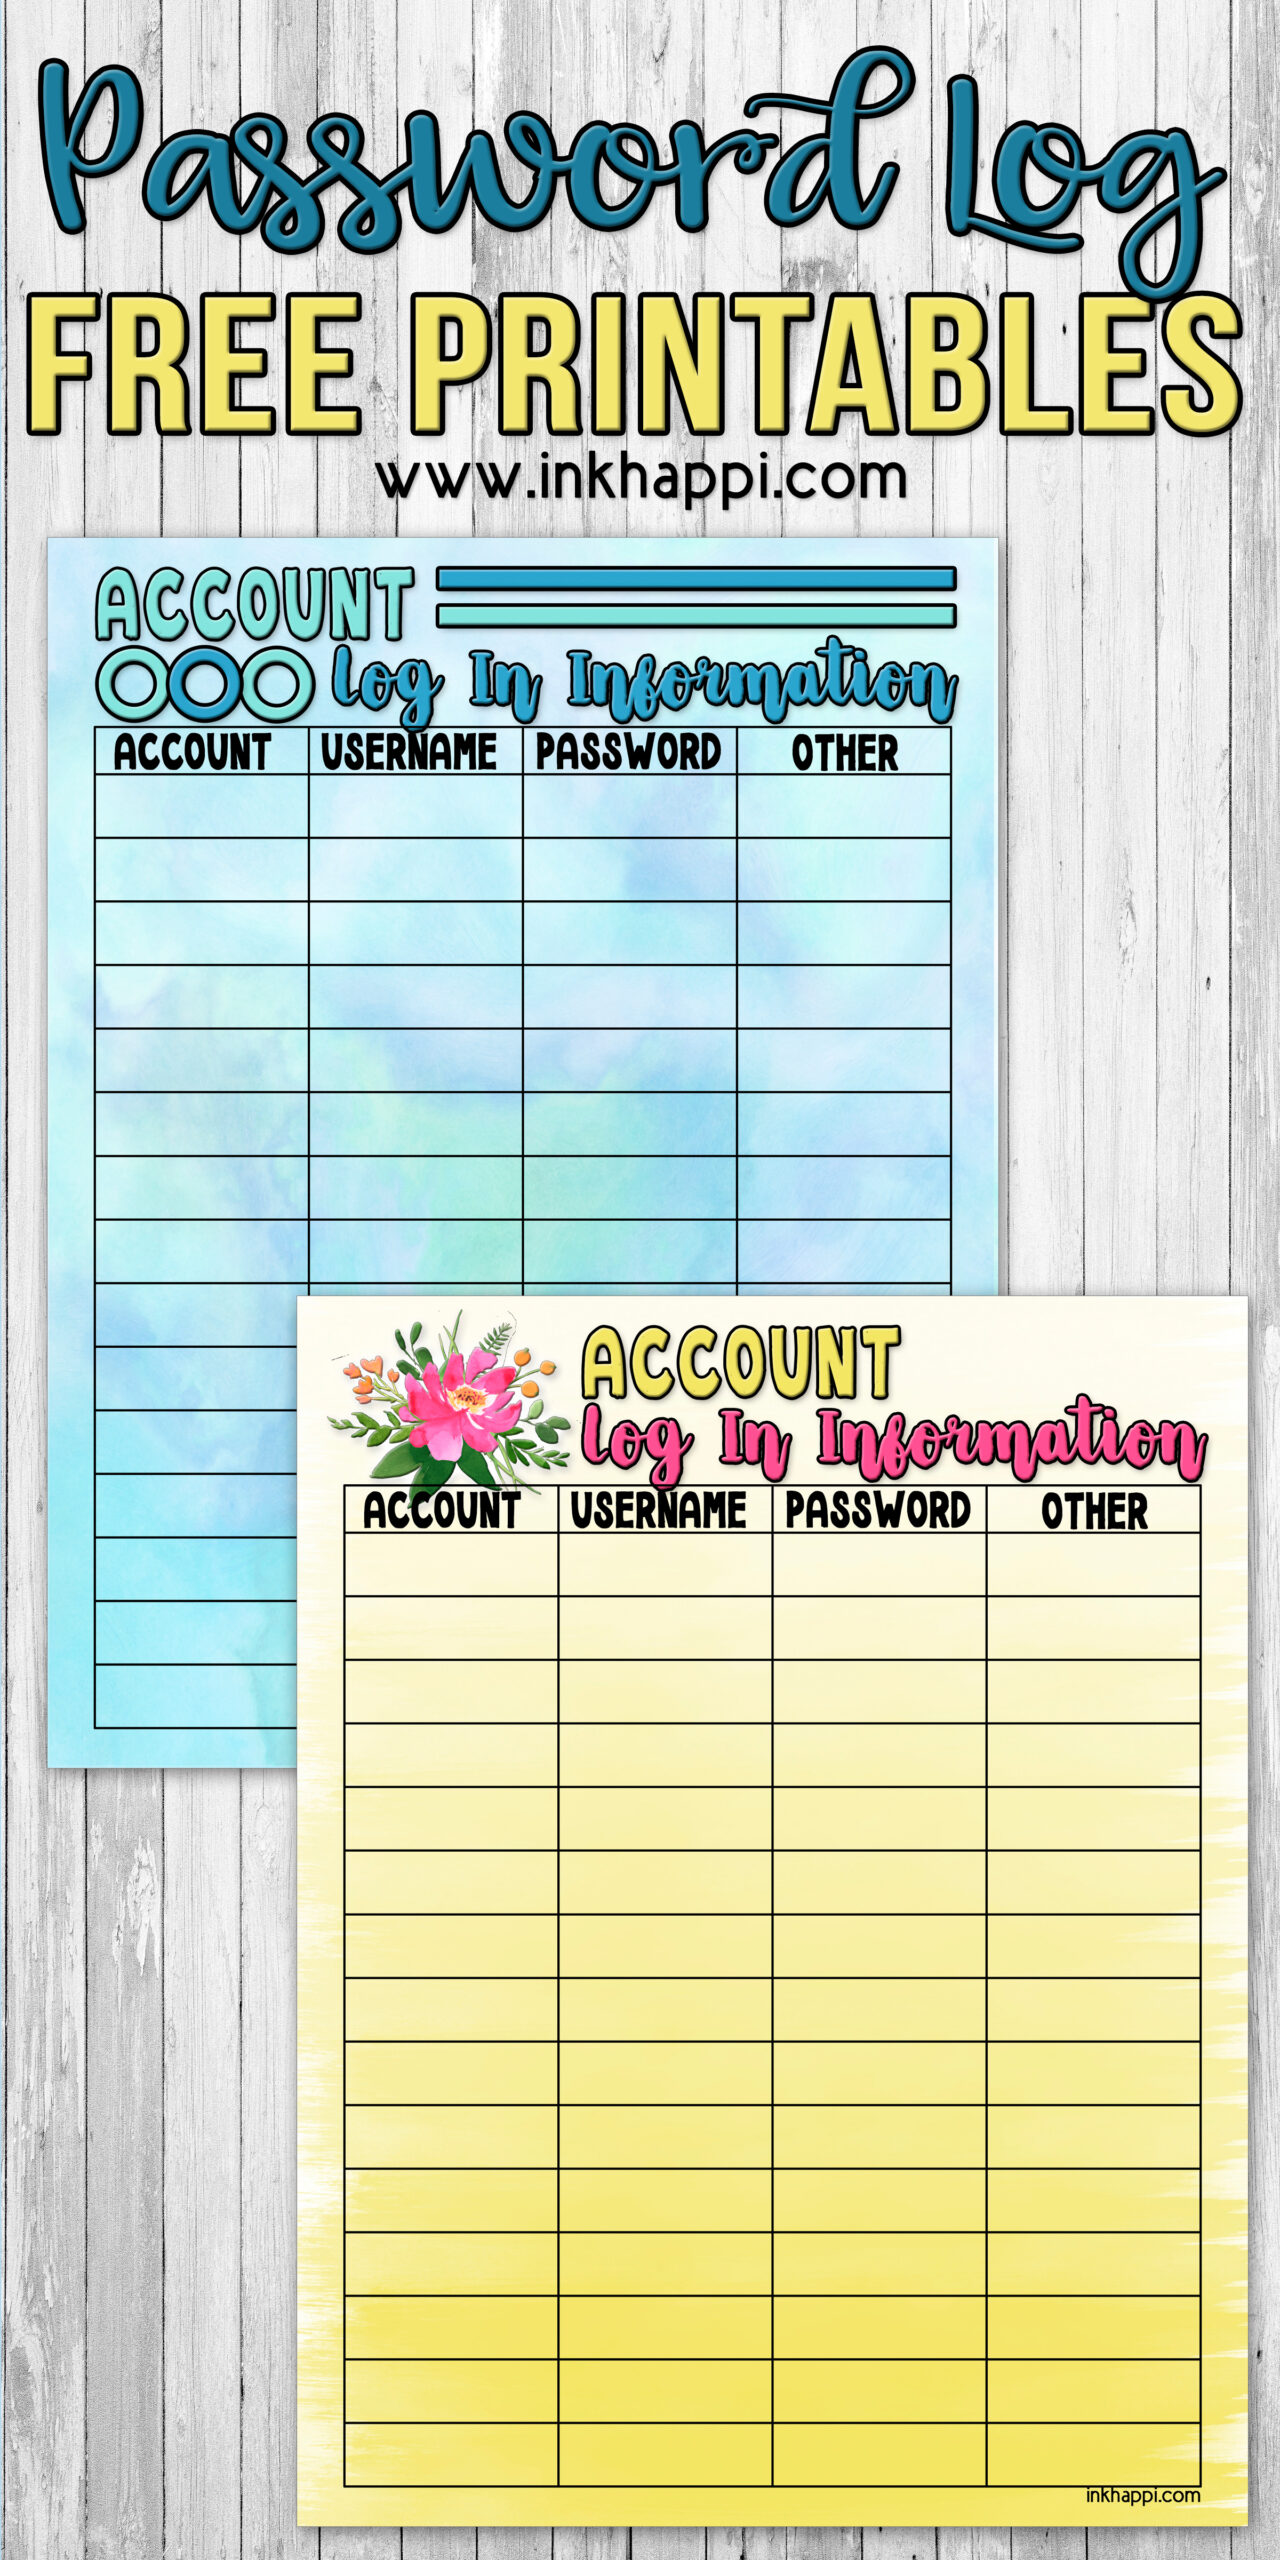 printable-password-log-and-creating-new-passwords-inkhappi